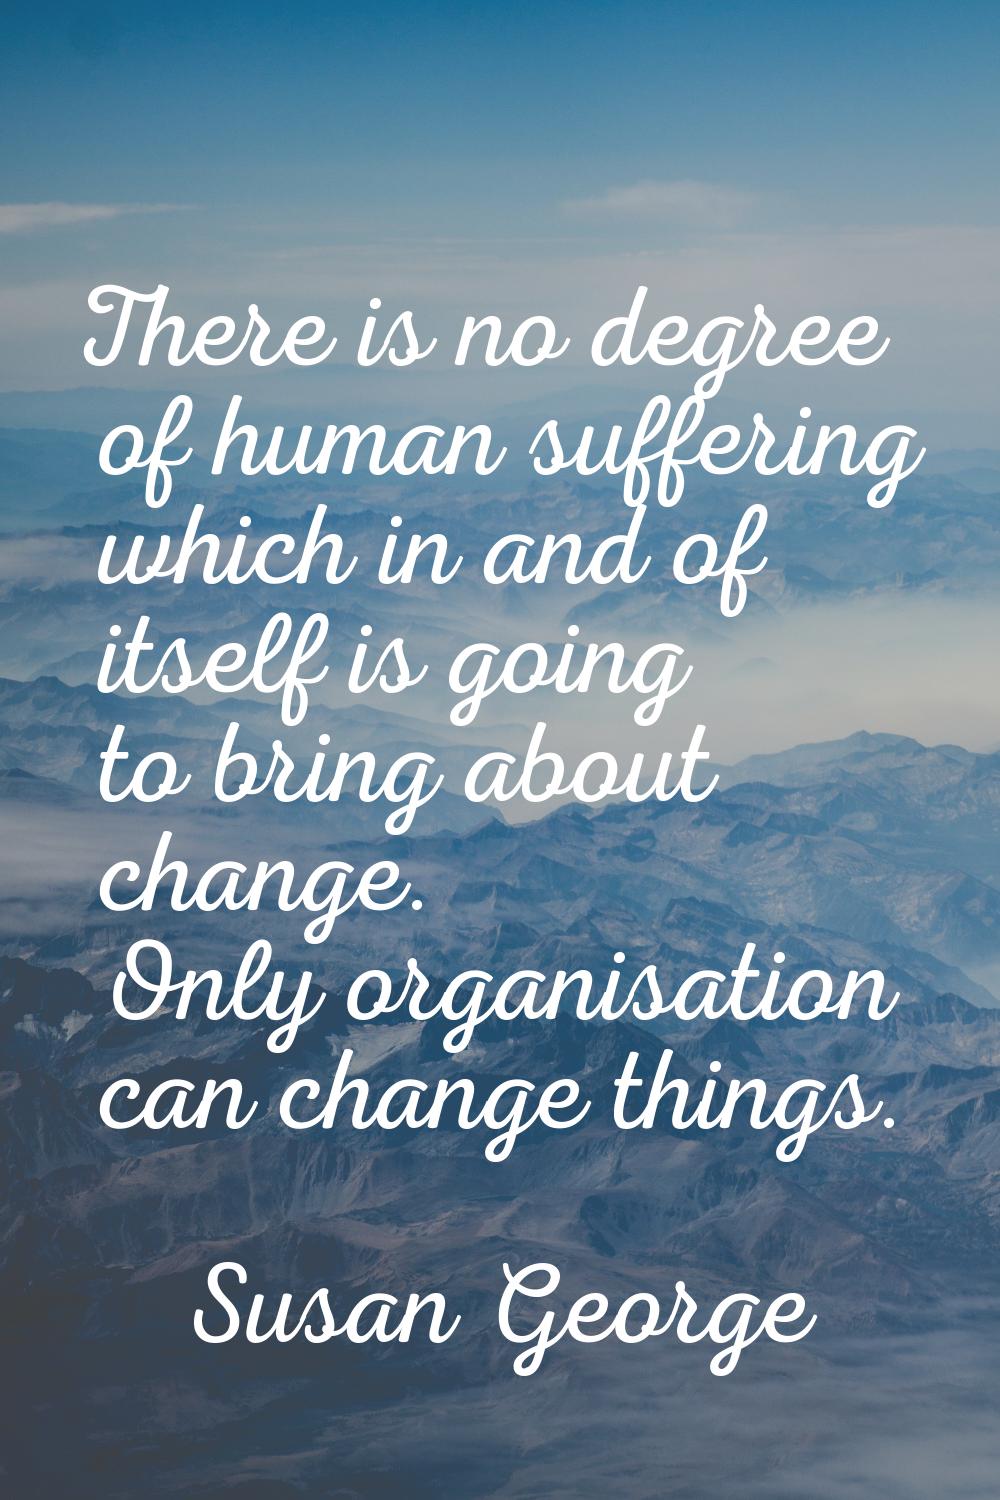 There is no degree of human suffering which in and of itself is going to bring about change. Only o